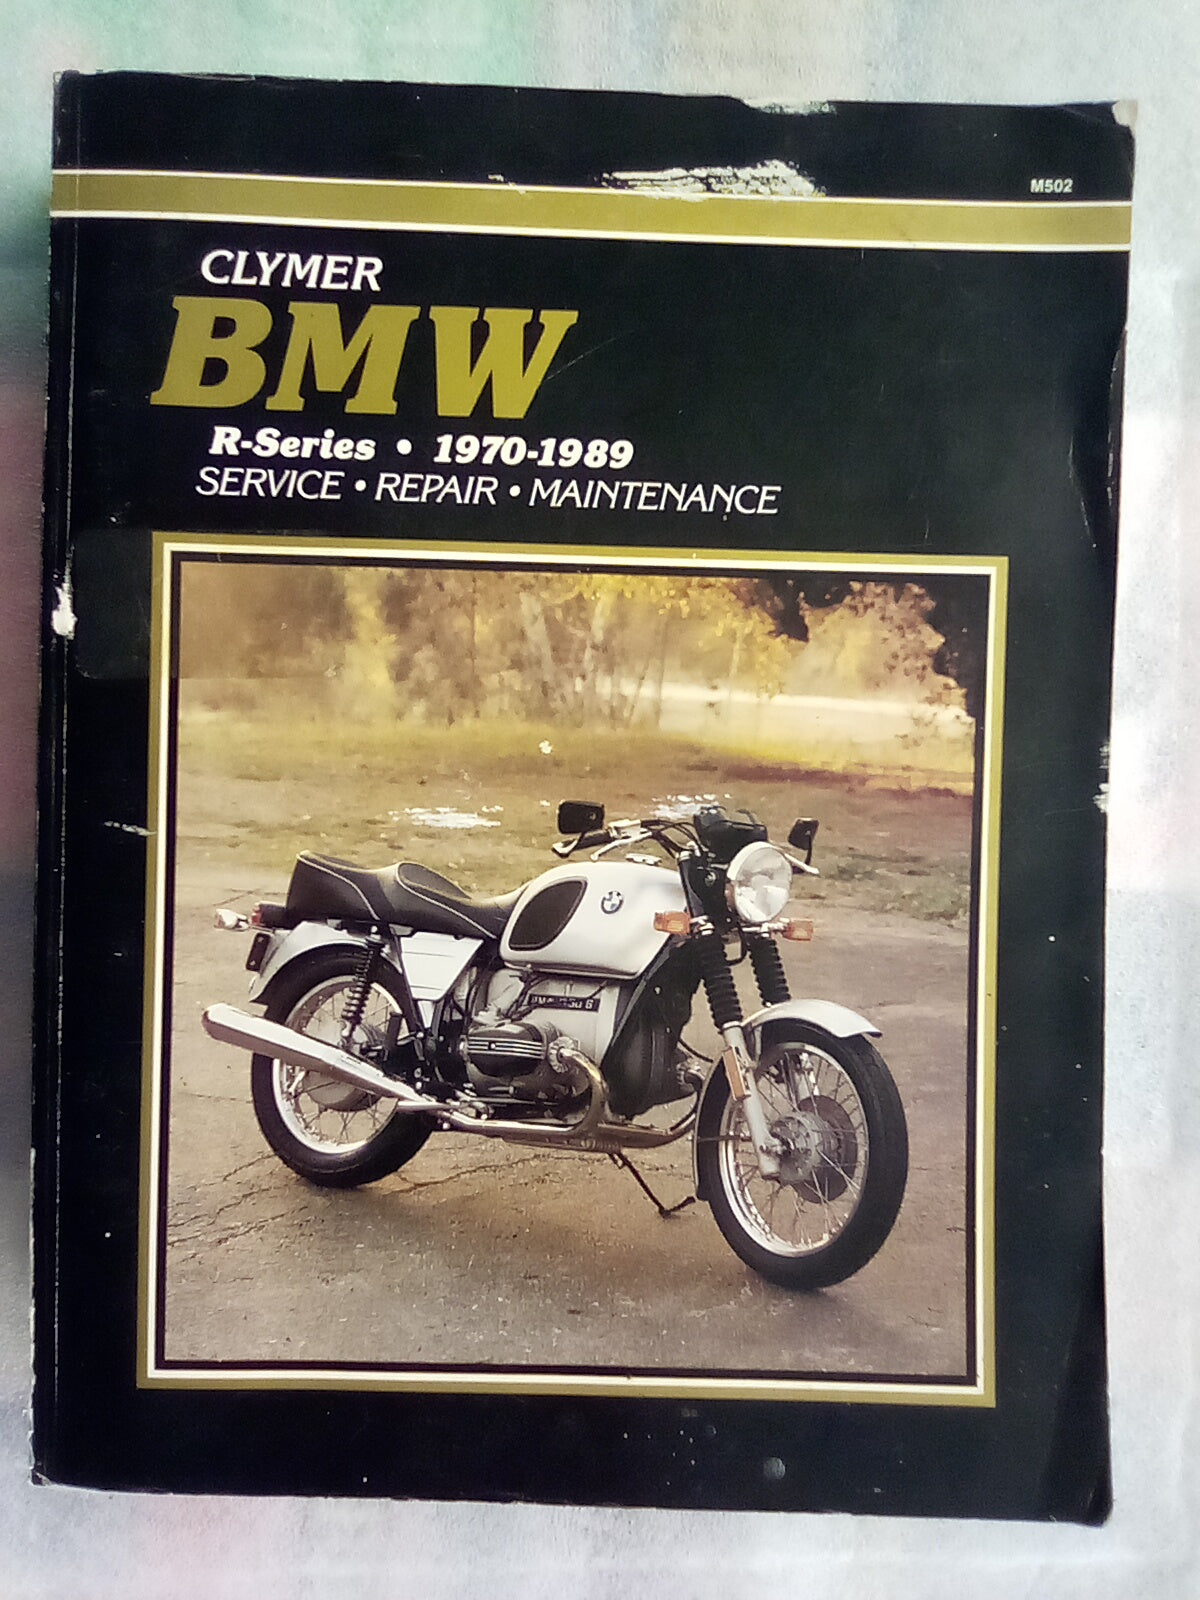 Clymer BMW R-Series 1970 to 1989 Service and Repair Manual